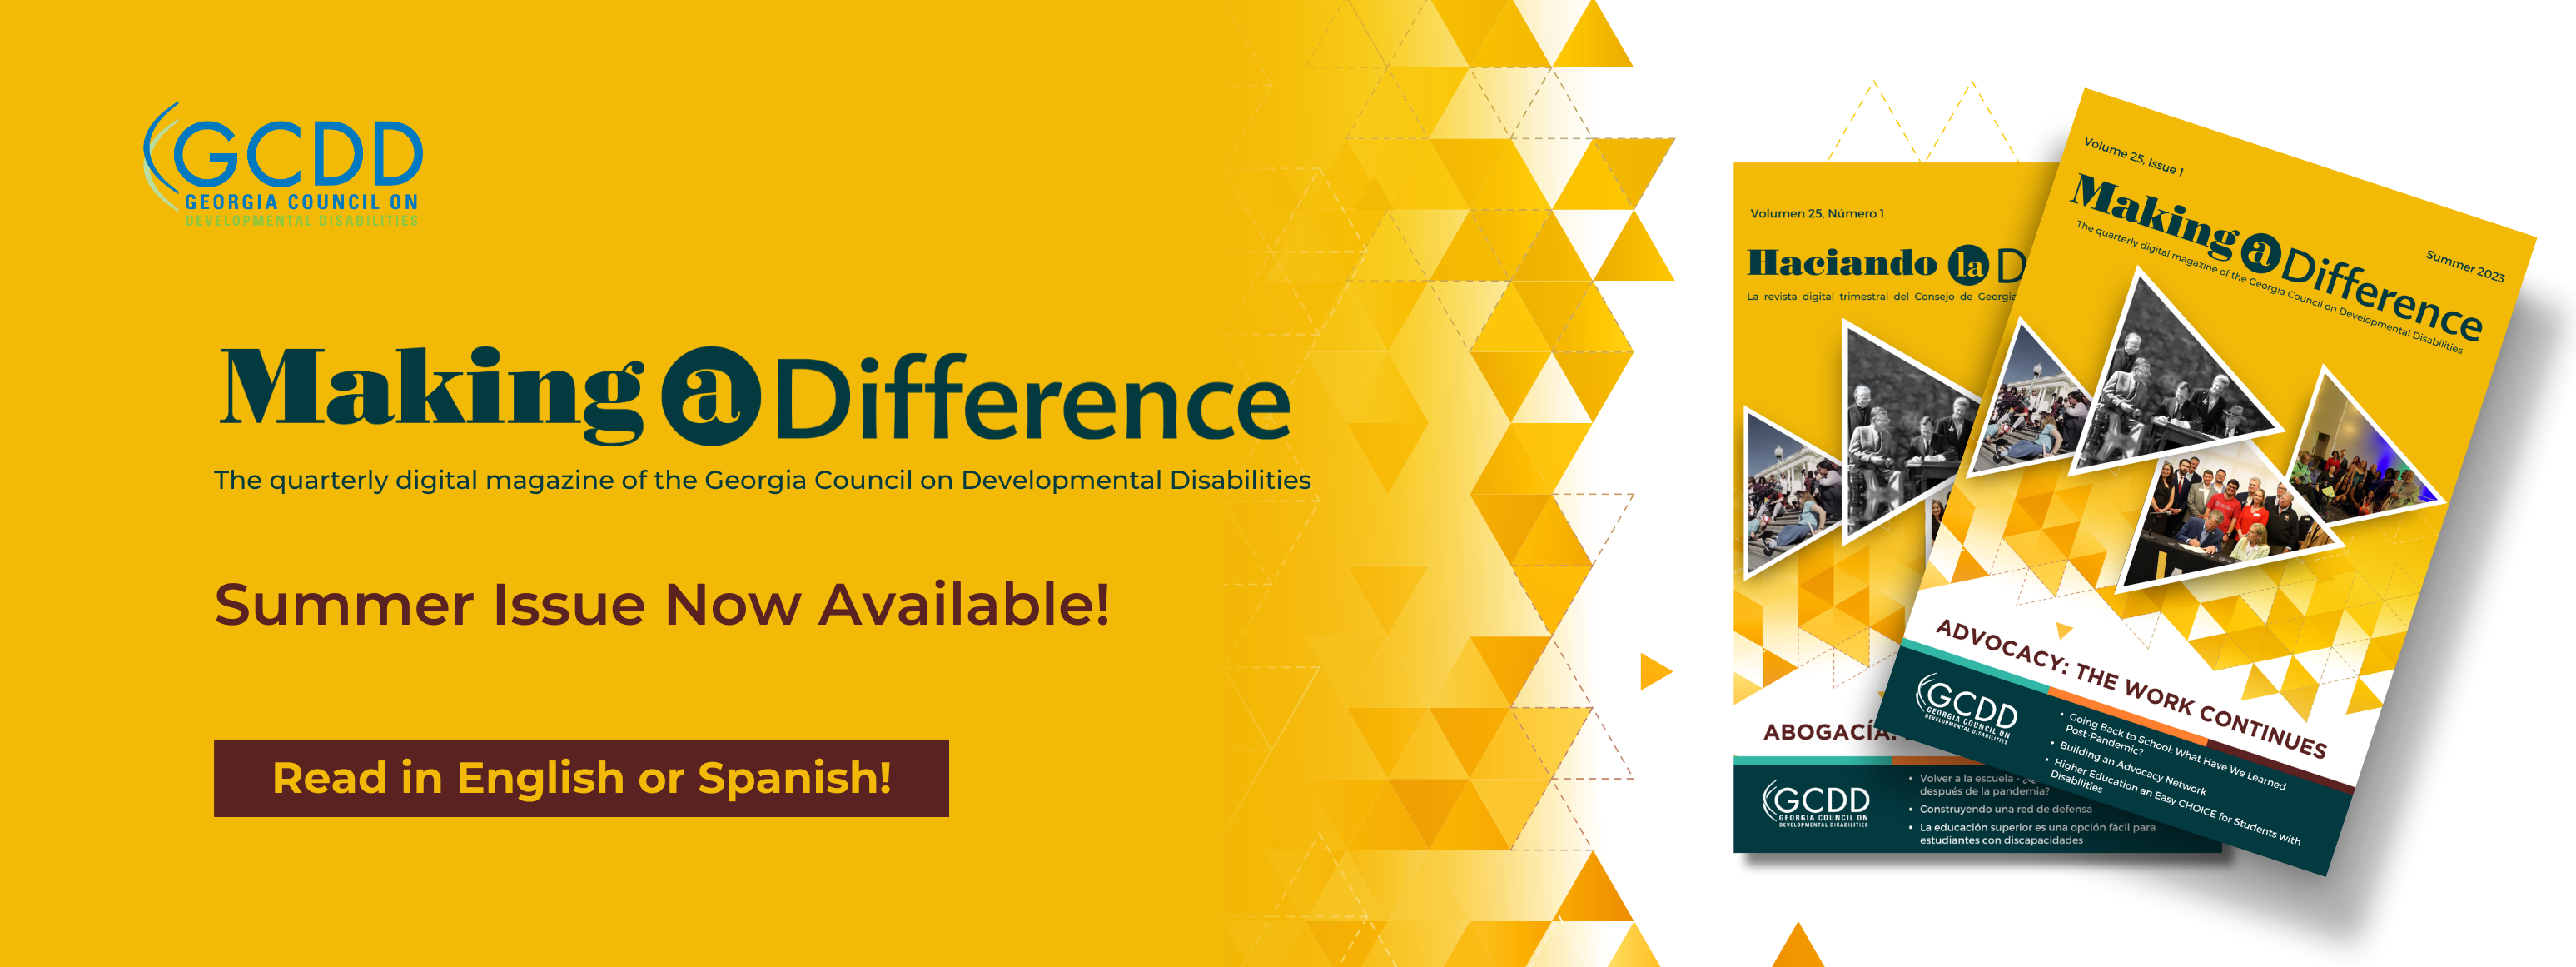 Read the Summer Issue of Making a Difference in English or Spanish!